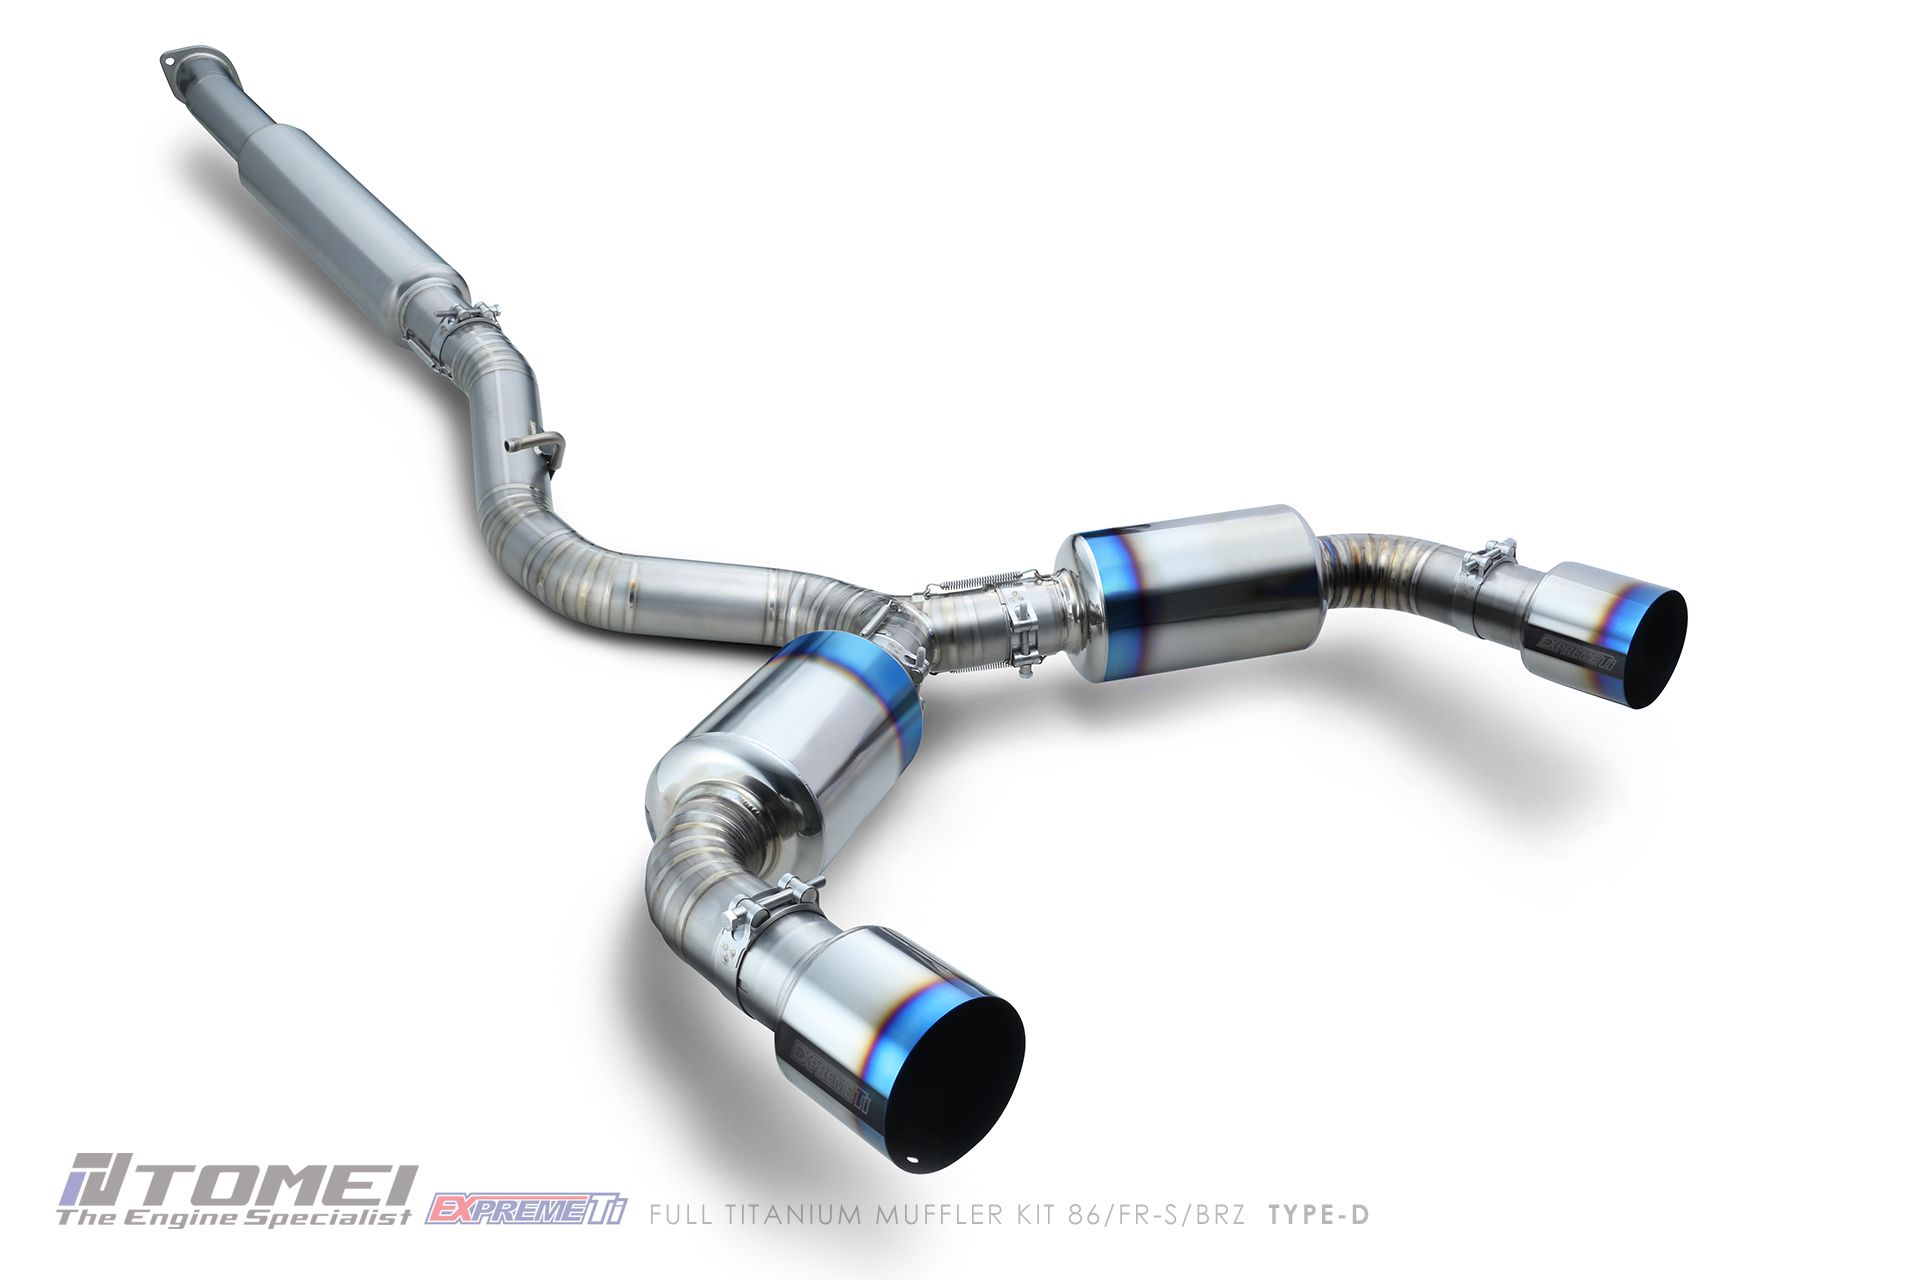 Exhaust System - Concept Z Performance